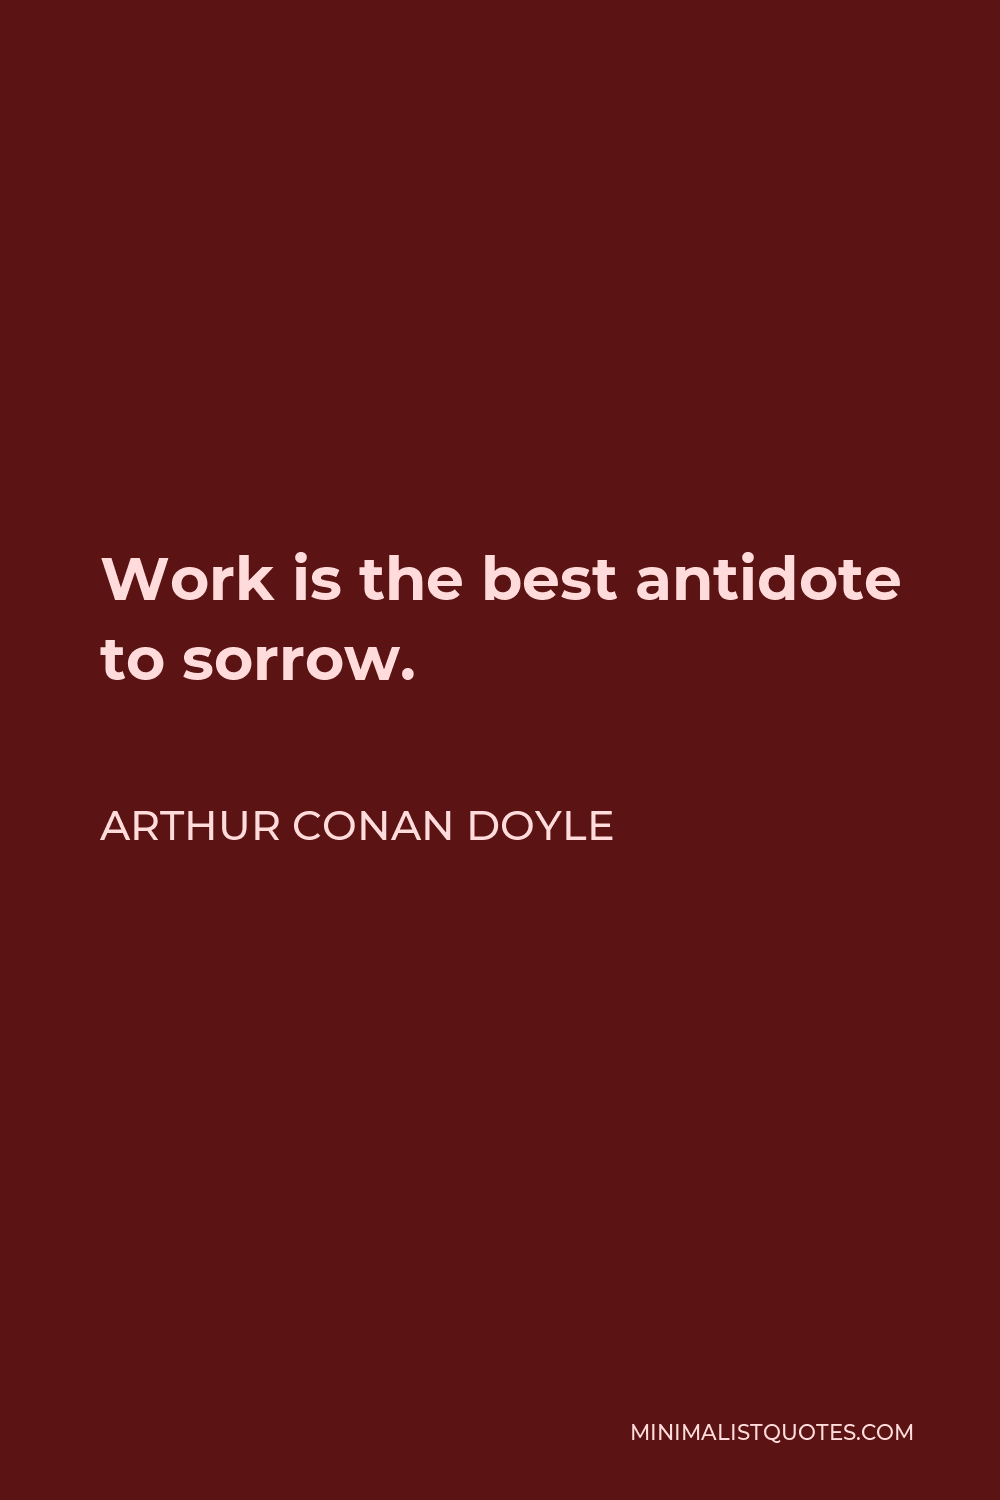 Arthur Conan Doyle Quote - Work is the best antidote to sorrow.